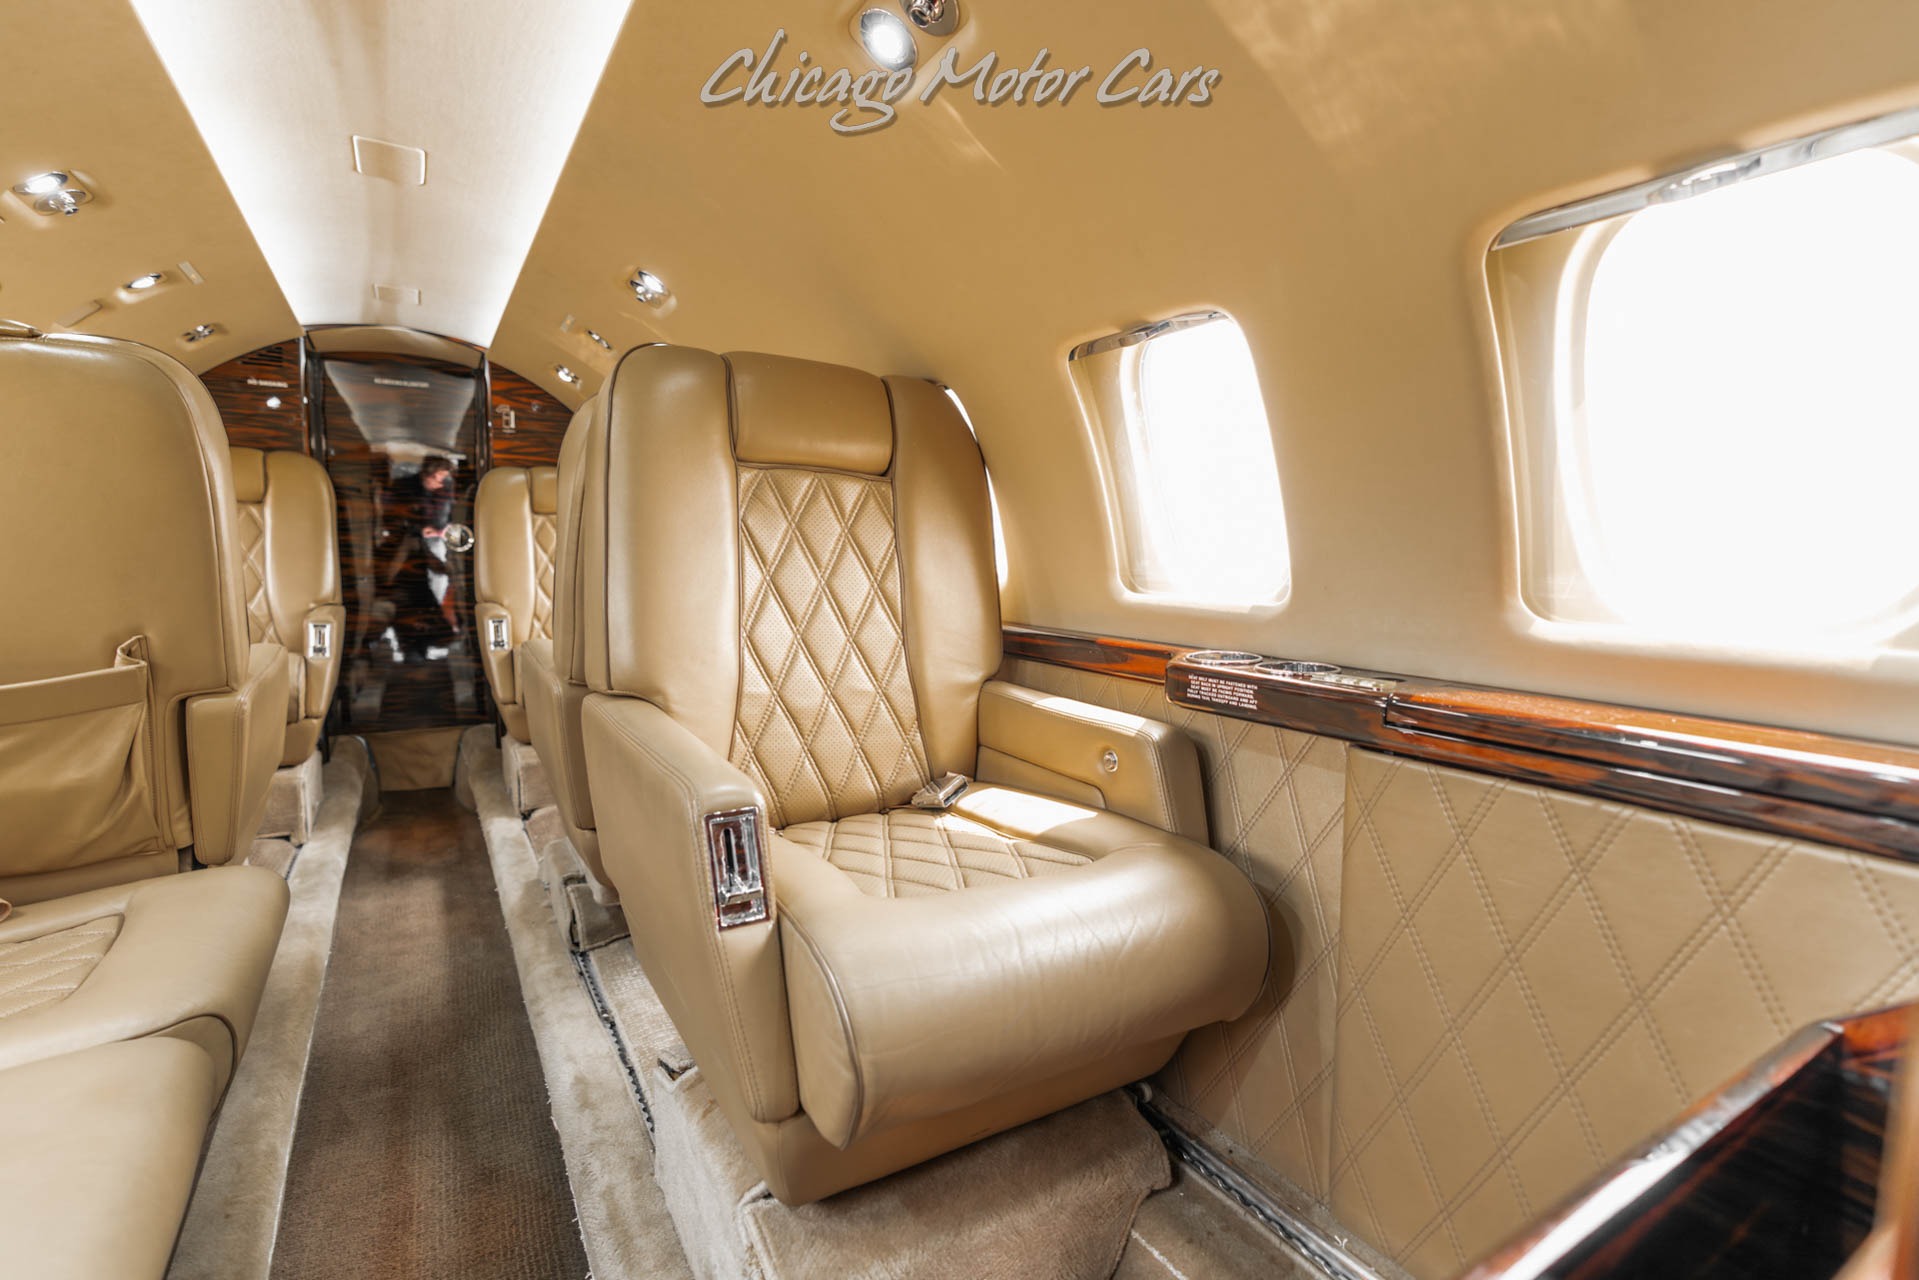 Used-1992-Hawker-800A-Low-Total-Time-Fresh-12--24--48--96-Month-Inspection-Completed